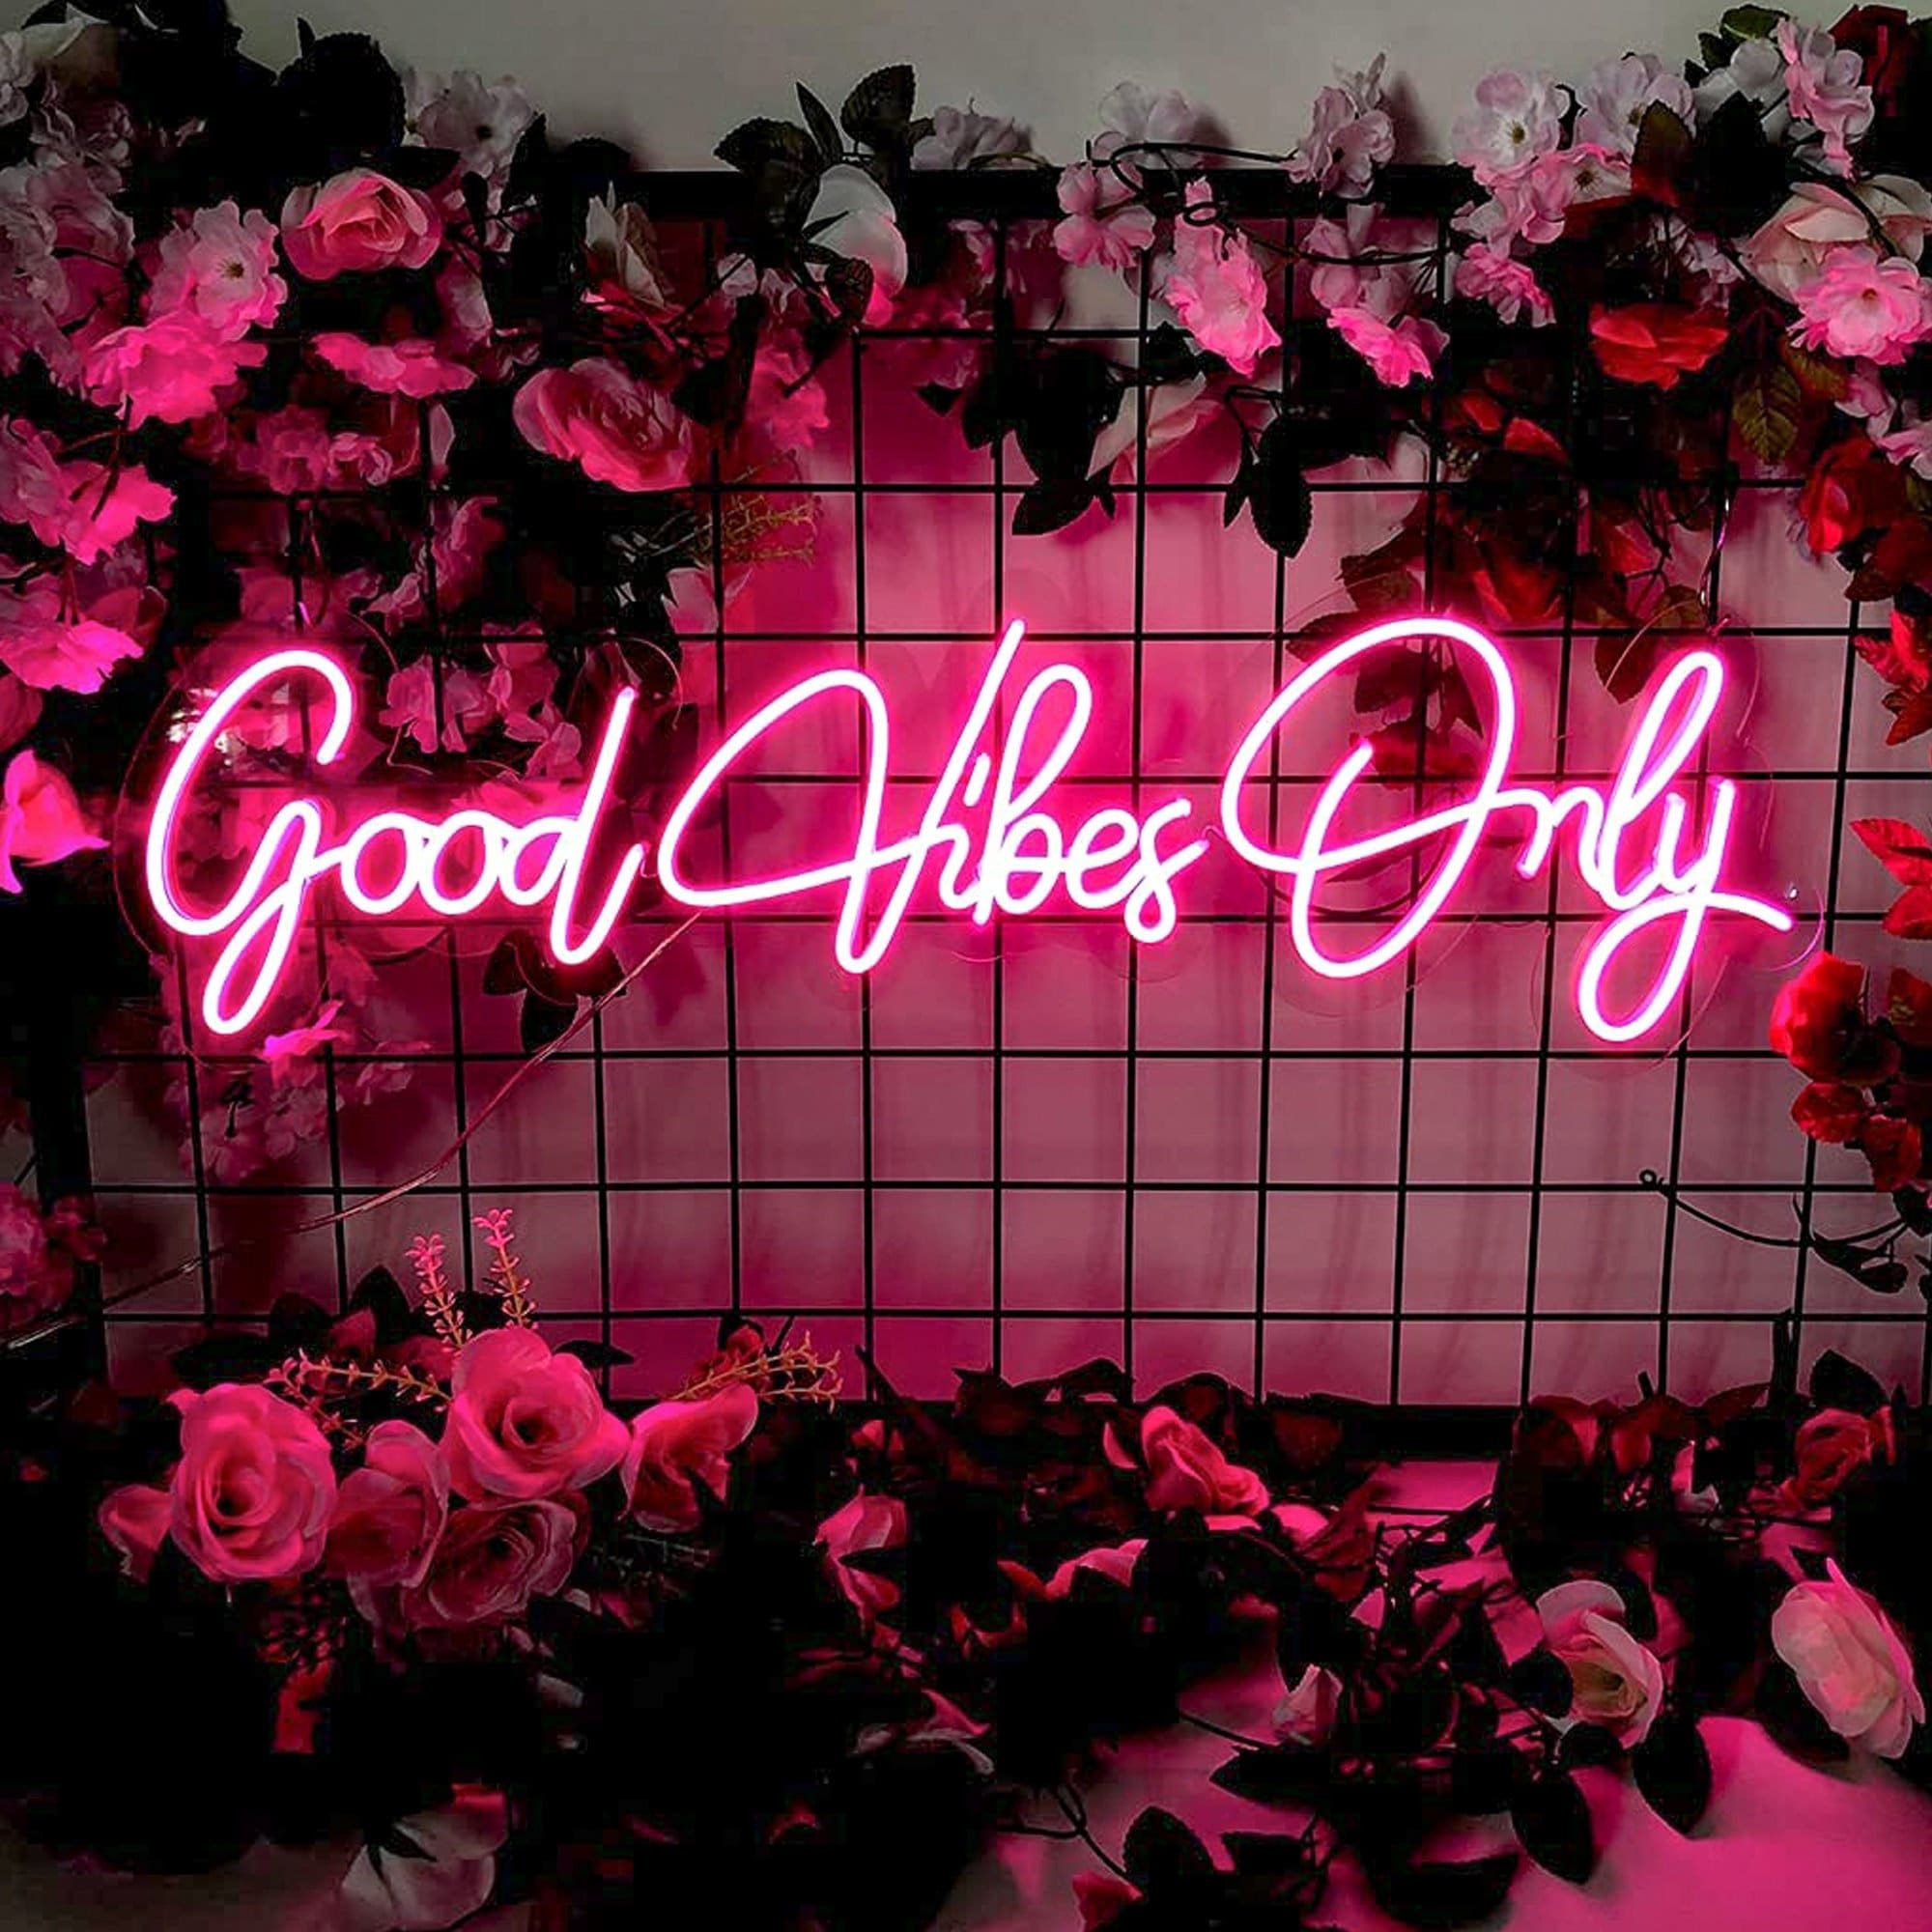 Orchid neon sign - Neon Vibes® neon signs